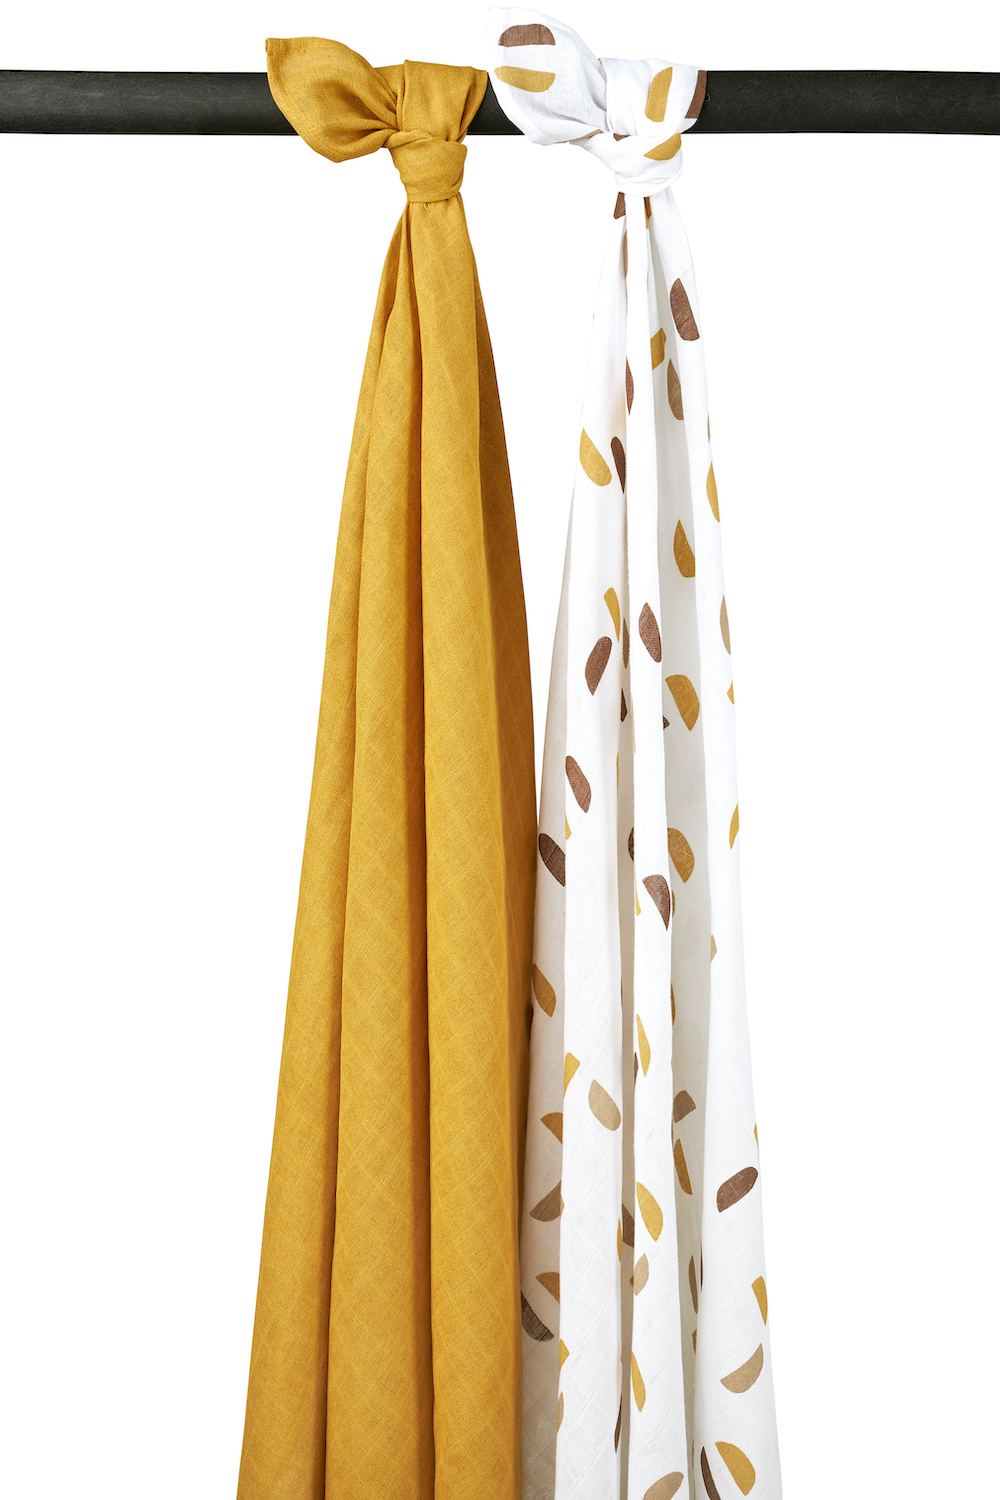 Swaddle 2-pack muslin Shapes - honey gold - 120x120cm